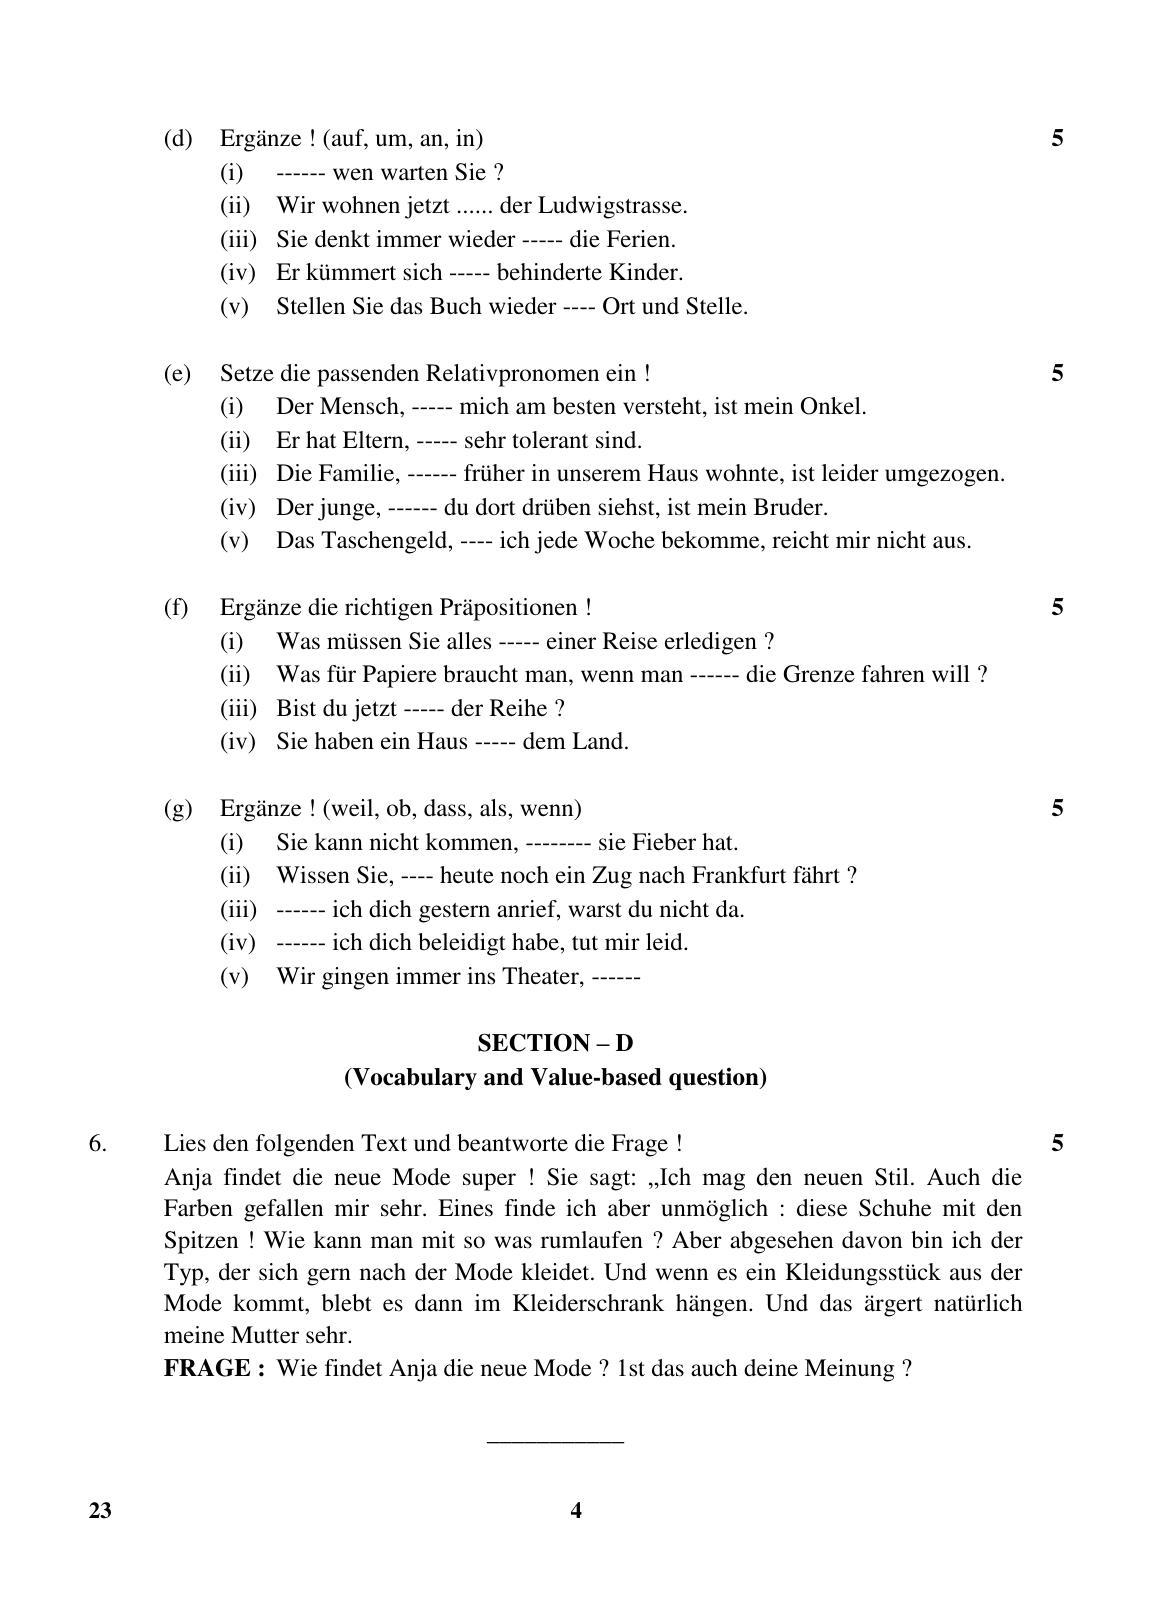 CBSE Class 10 23 (German) 2018 Question Paper - Page 4